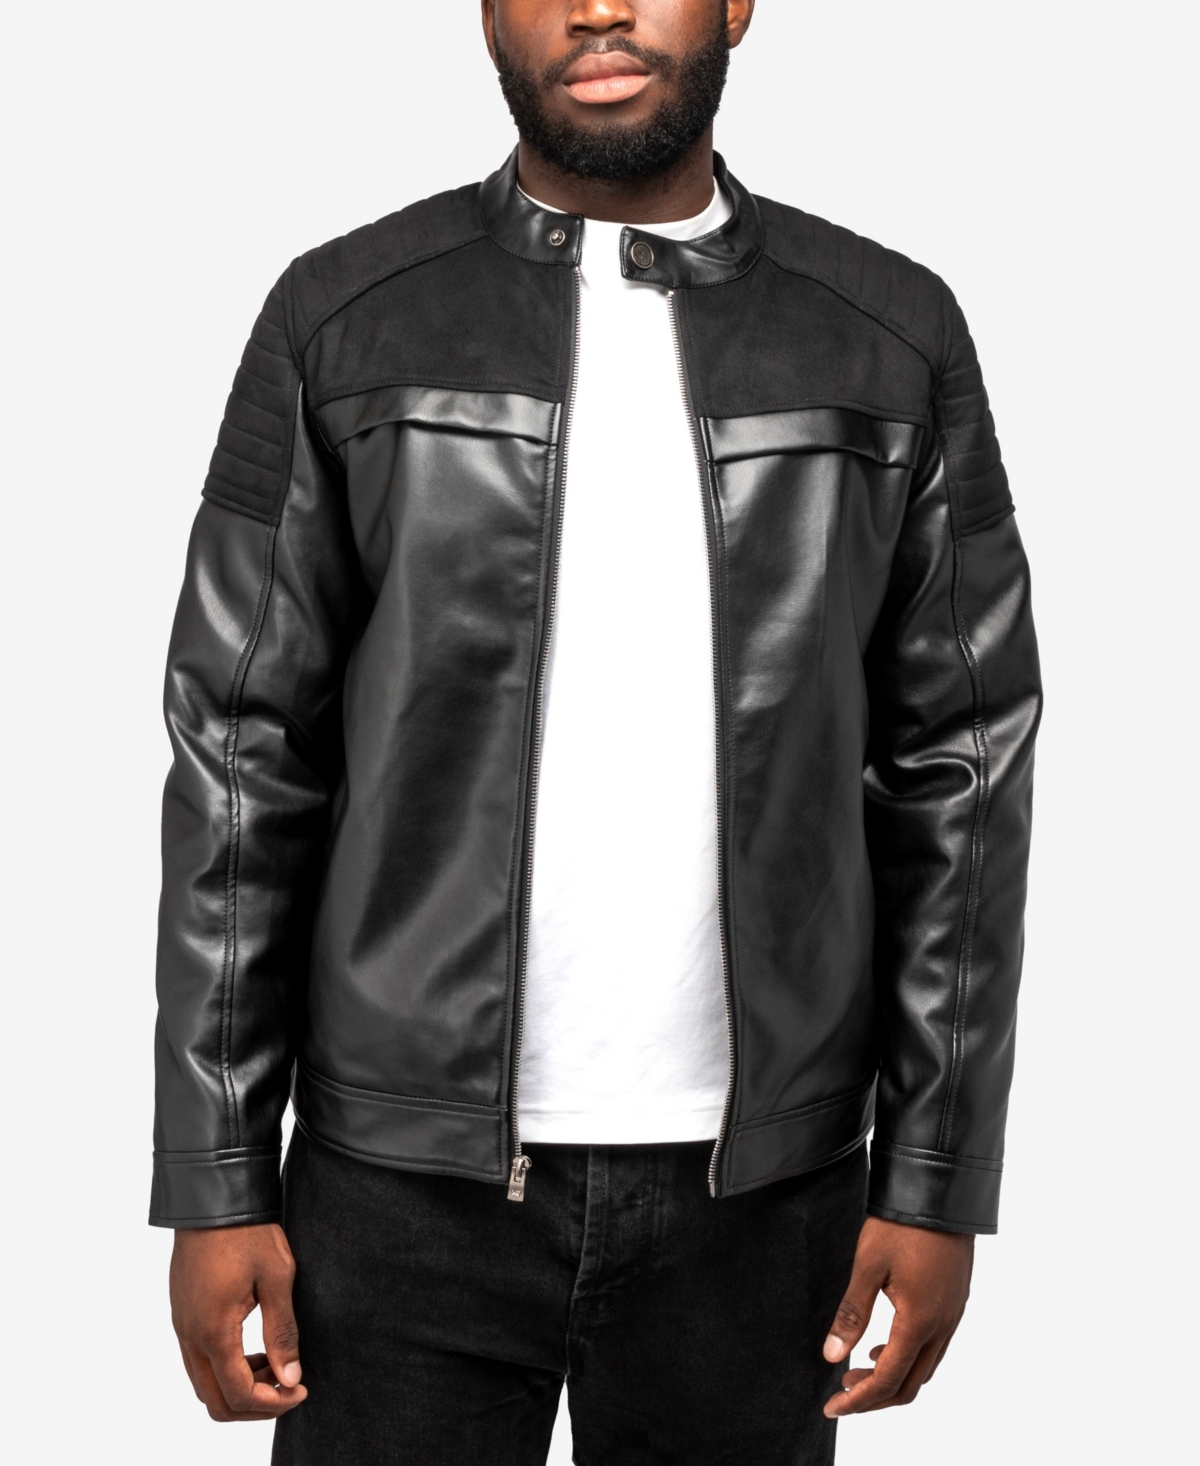 X-ray Men's Shiny Polyurethane And Faux Suede Detailing With Faux Shearling Lining Jacket In Black,black